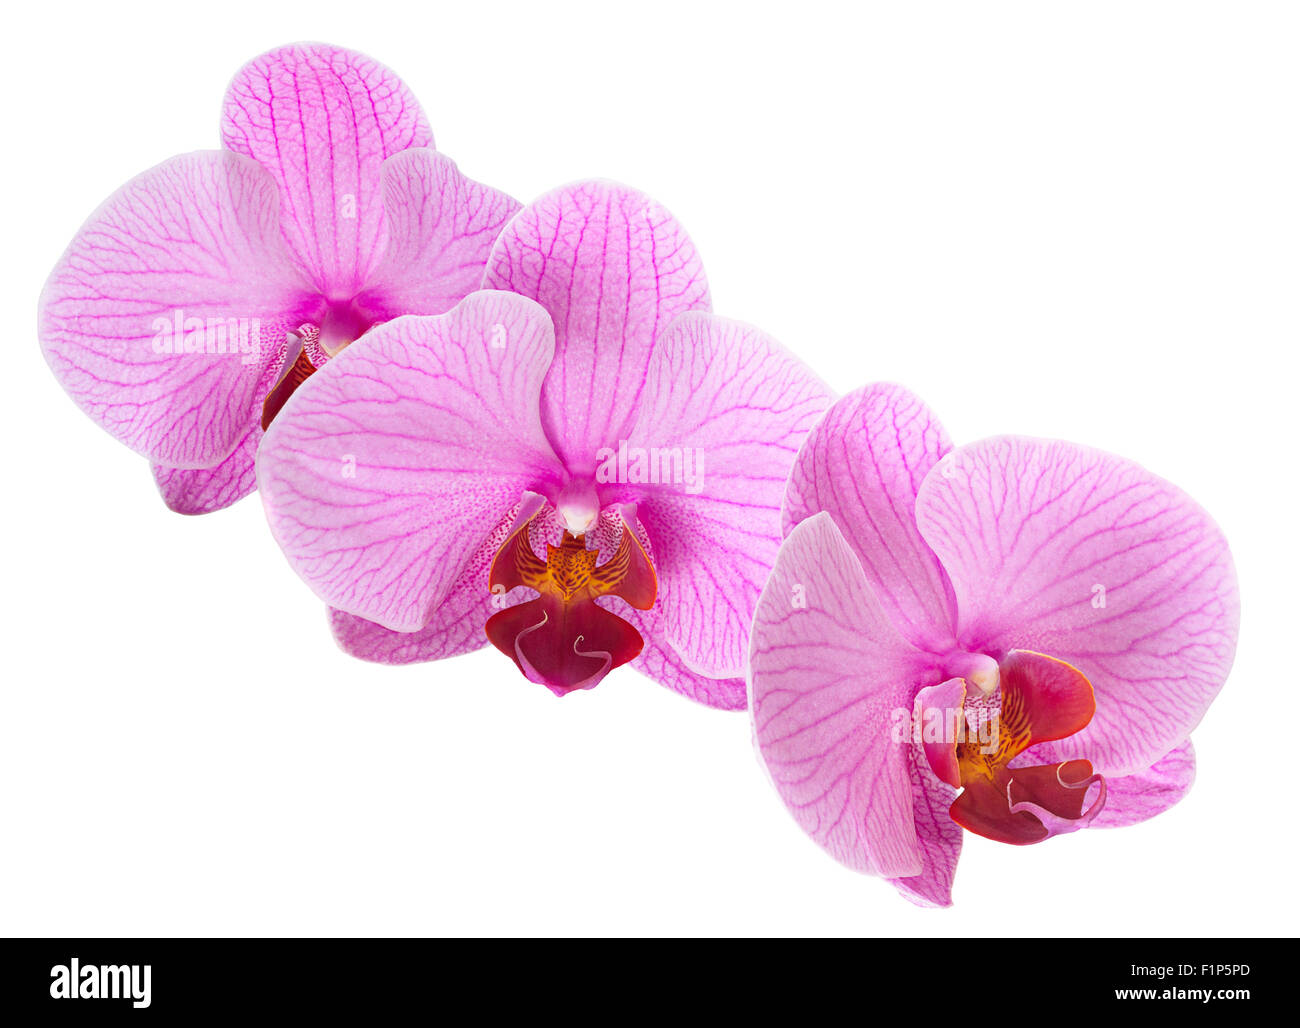 Pink orchid closeup isolated on white Banque D'Images